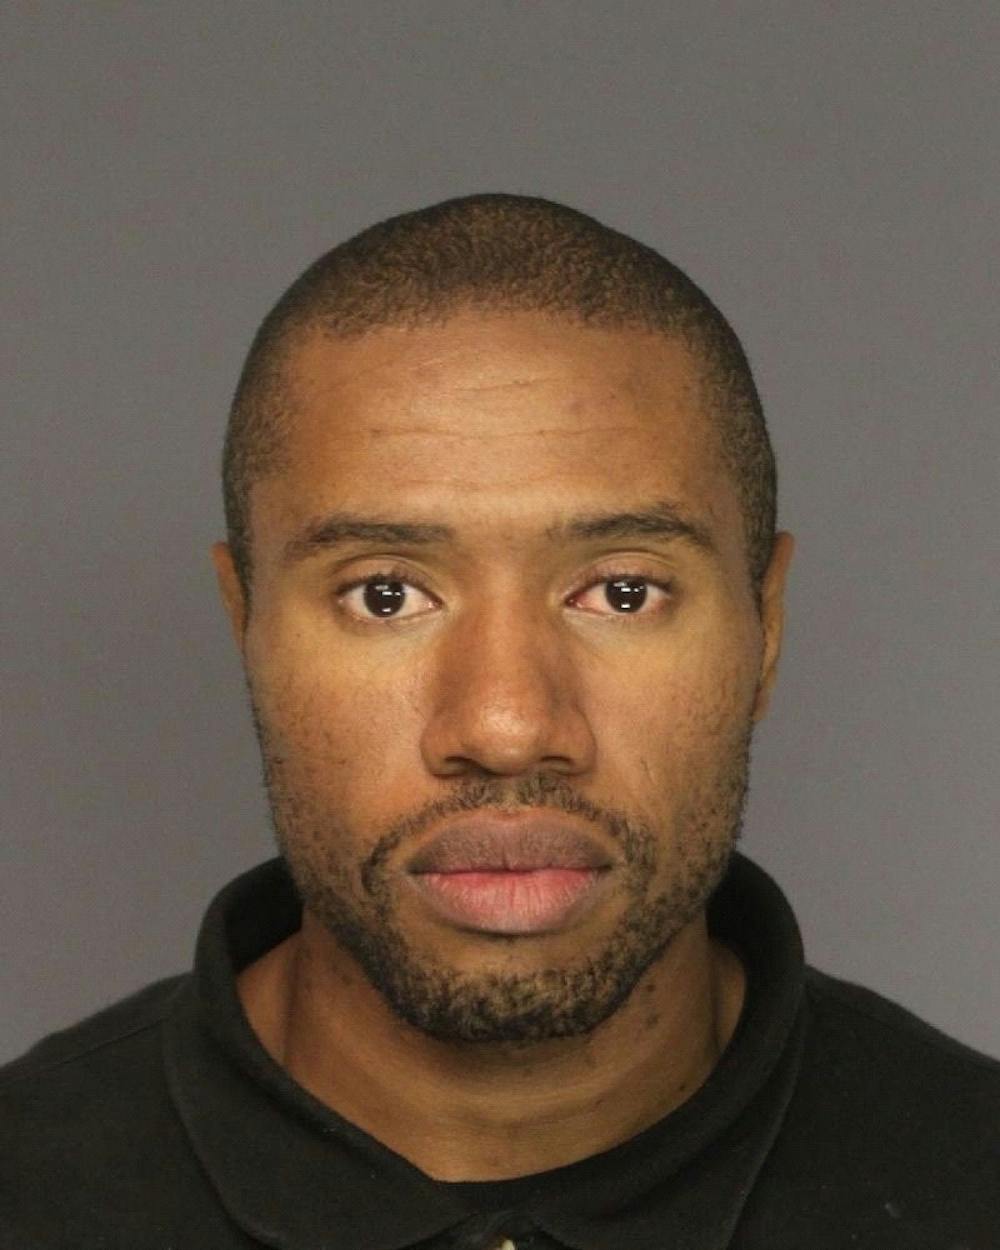 <p>Ali Muhammad Brown. Photo courtesy of the Essex County Prosecutor's Office.</p>